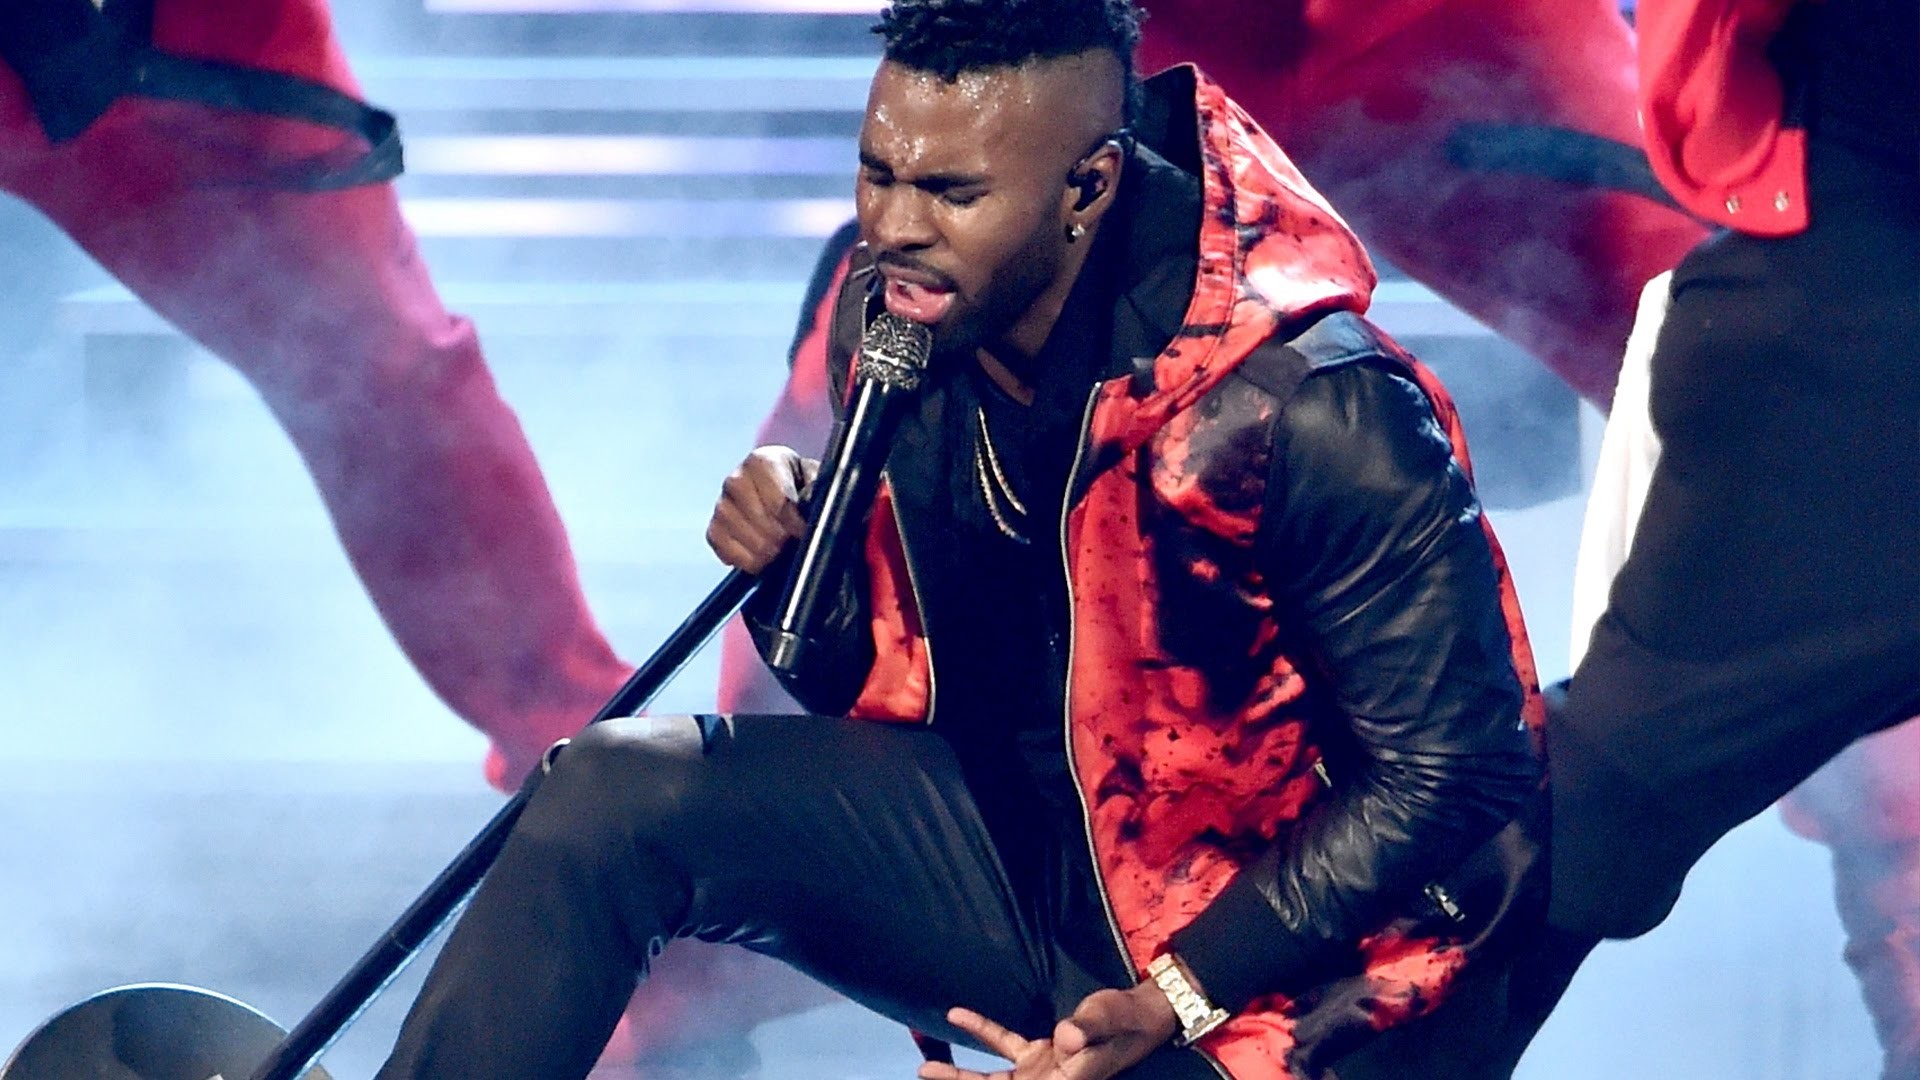 1920x1080 Jason Derulo Performs “Get Ugly” & “Want To Want Me” At 2016 People's  Choice Awards